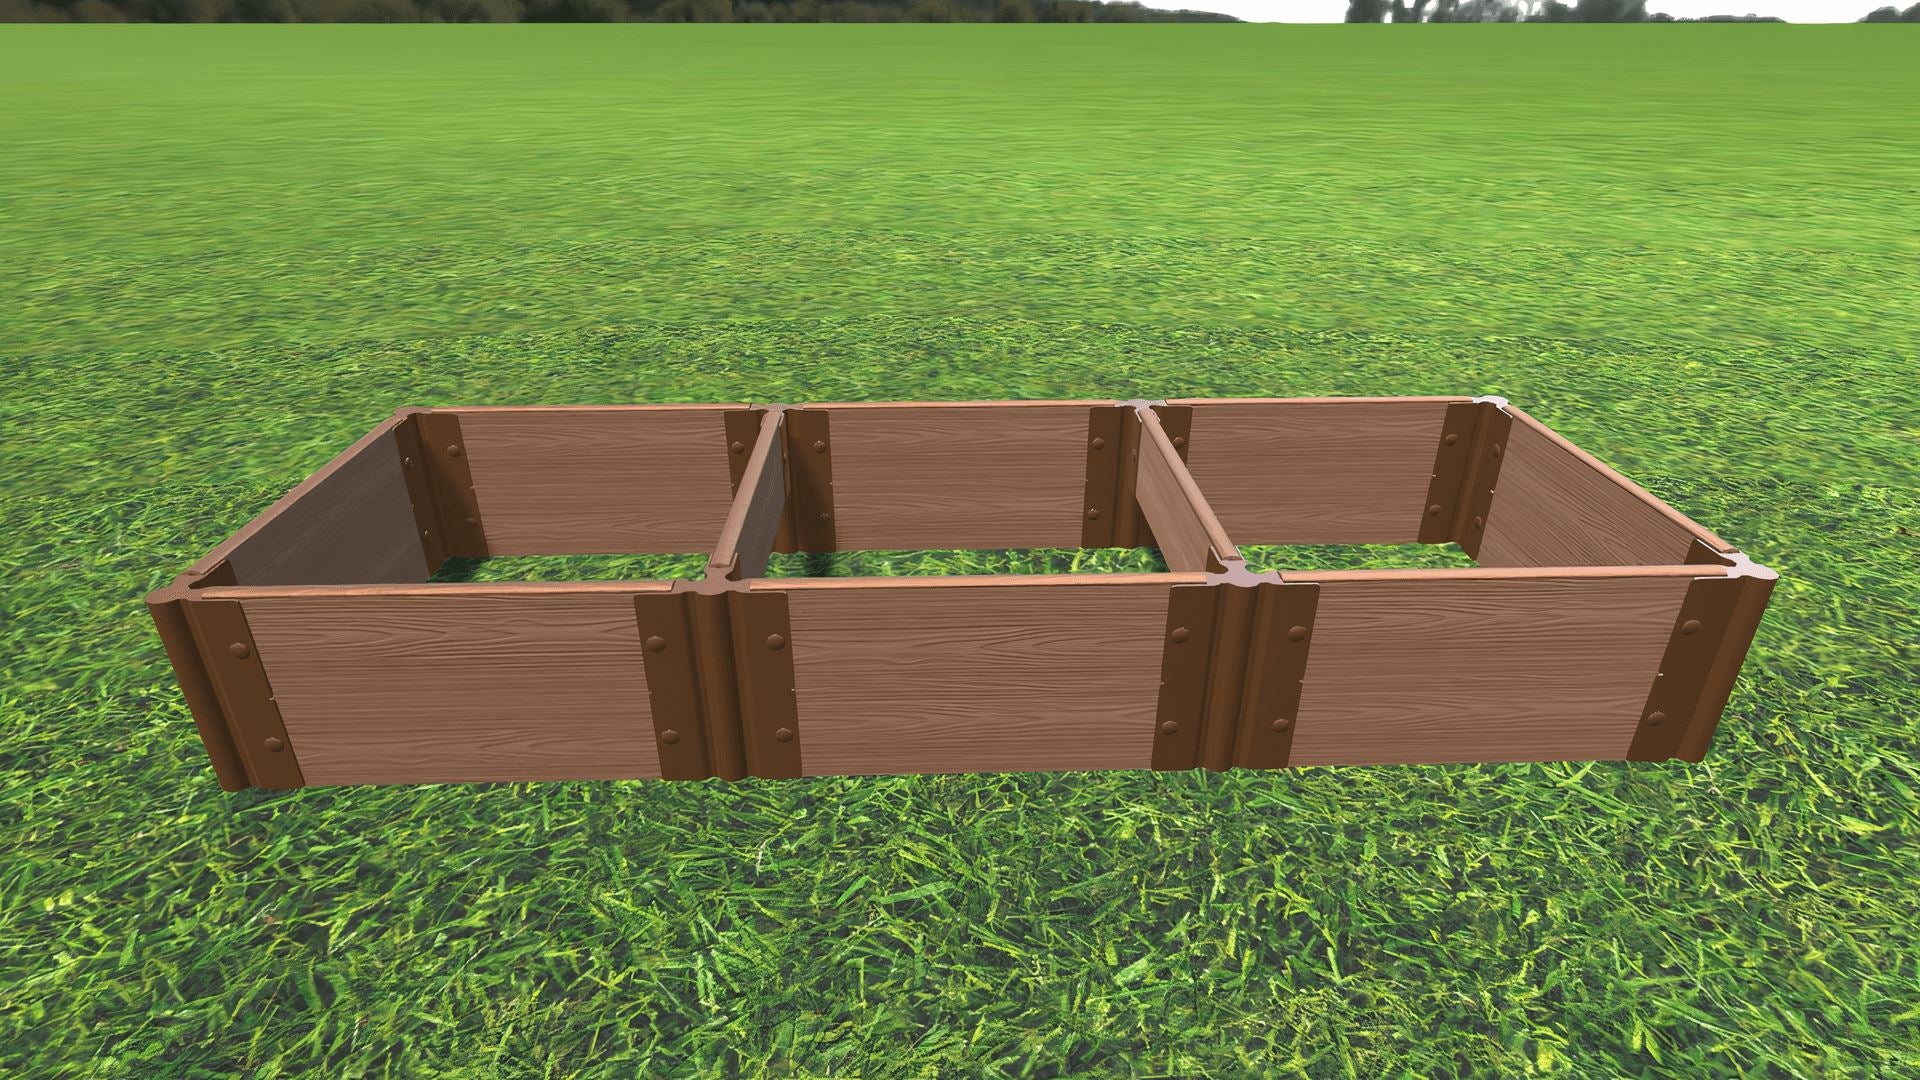 Tool-Free 2' x 6' Raised Garden Bed Raised Bed Planters Frame It All Classic Sienna 1'' 2 = 11"